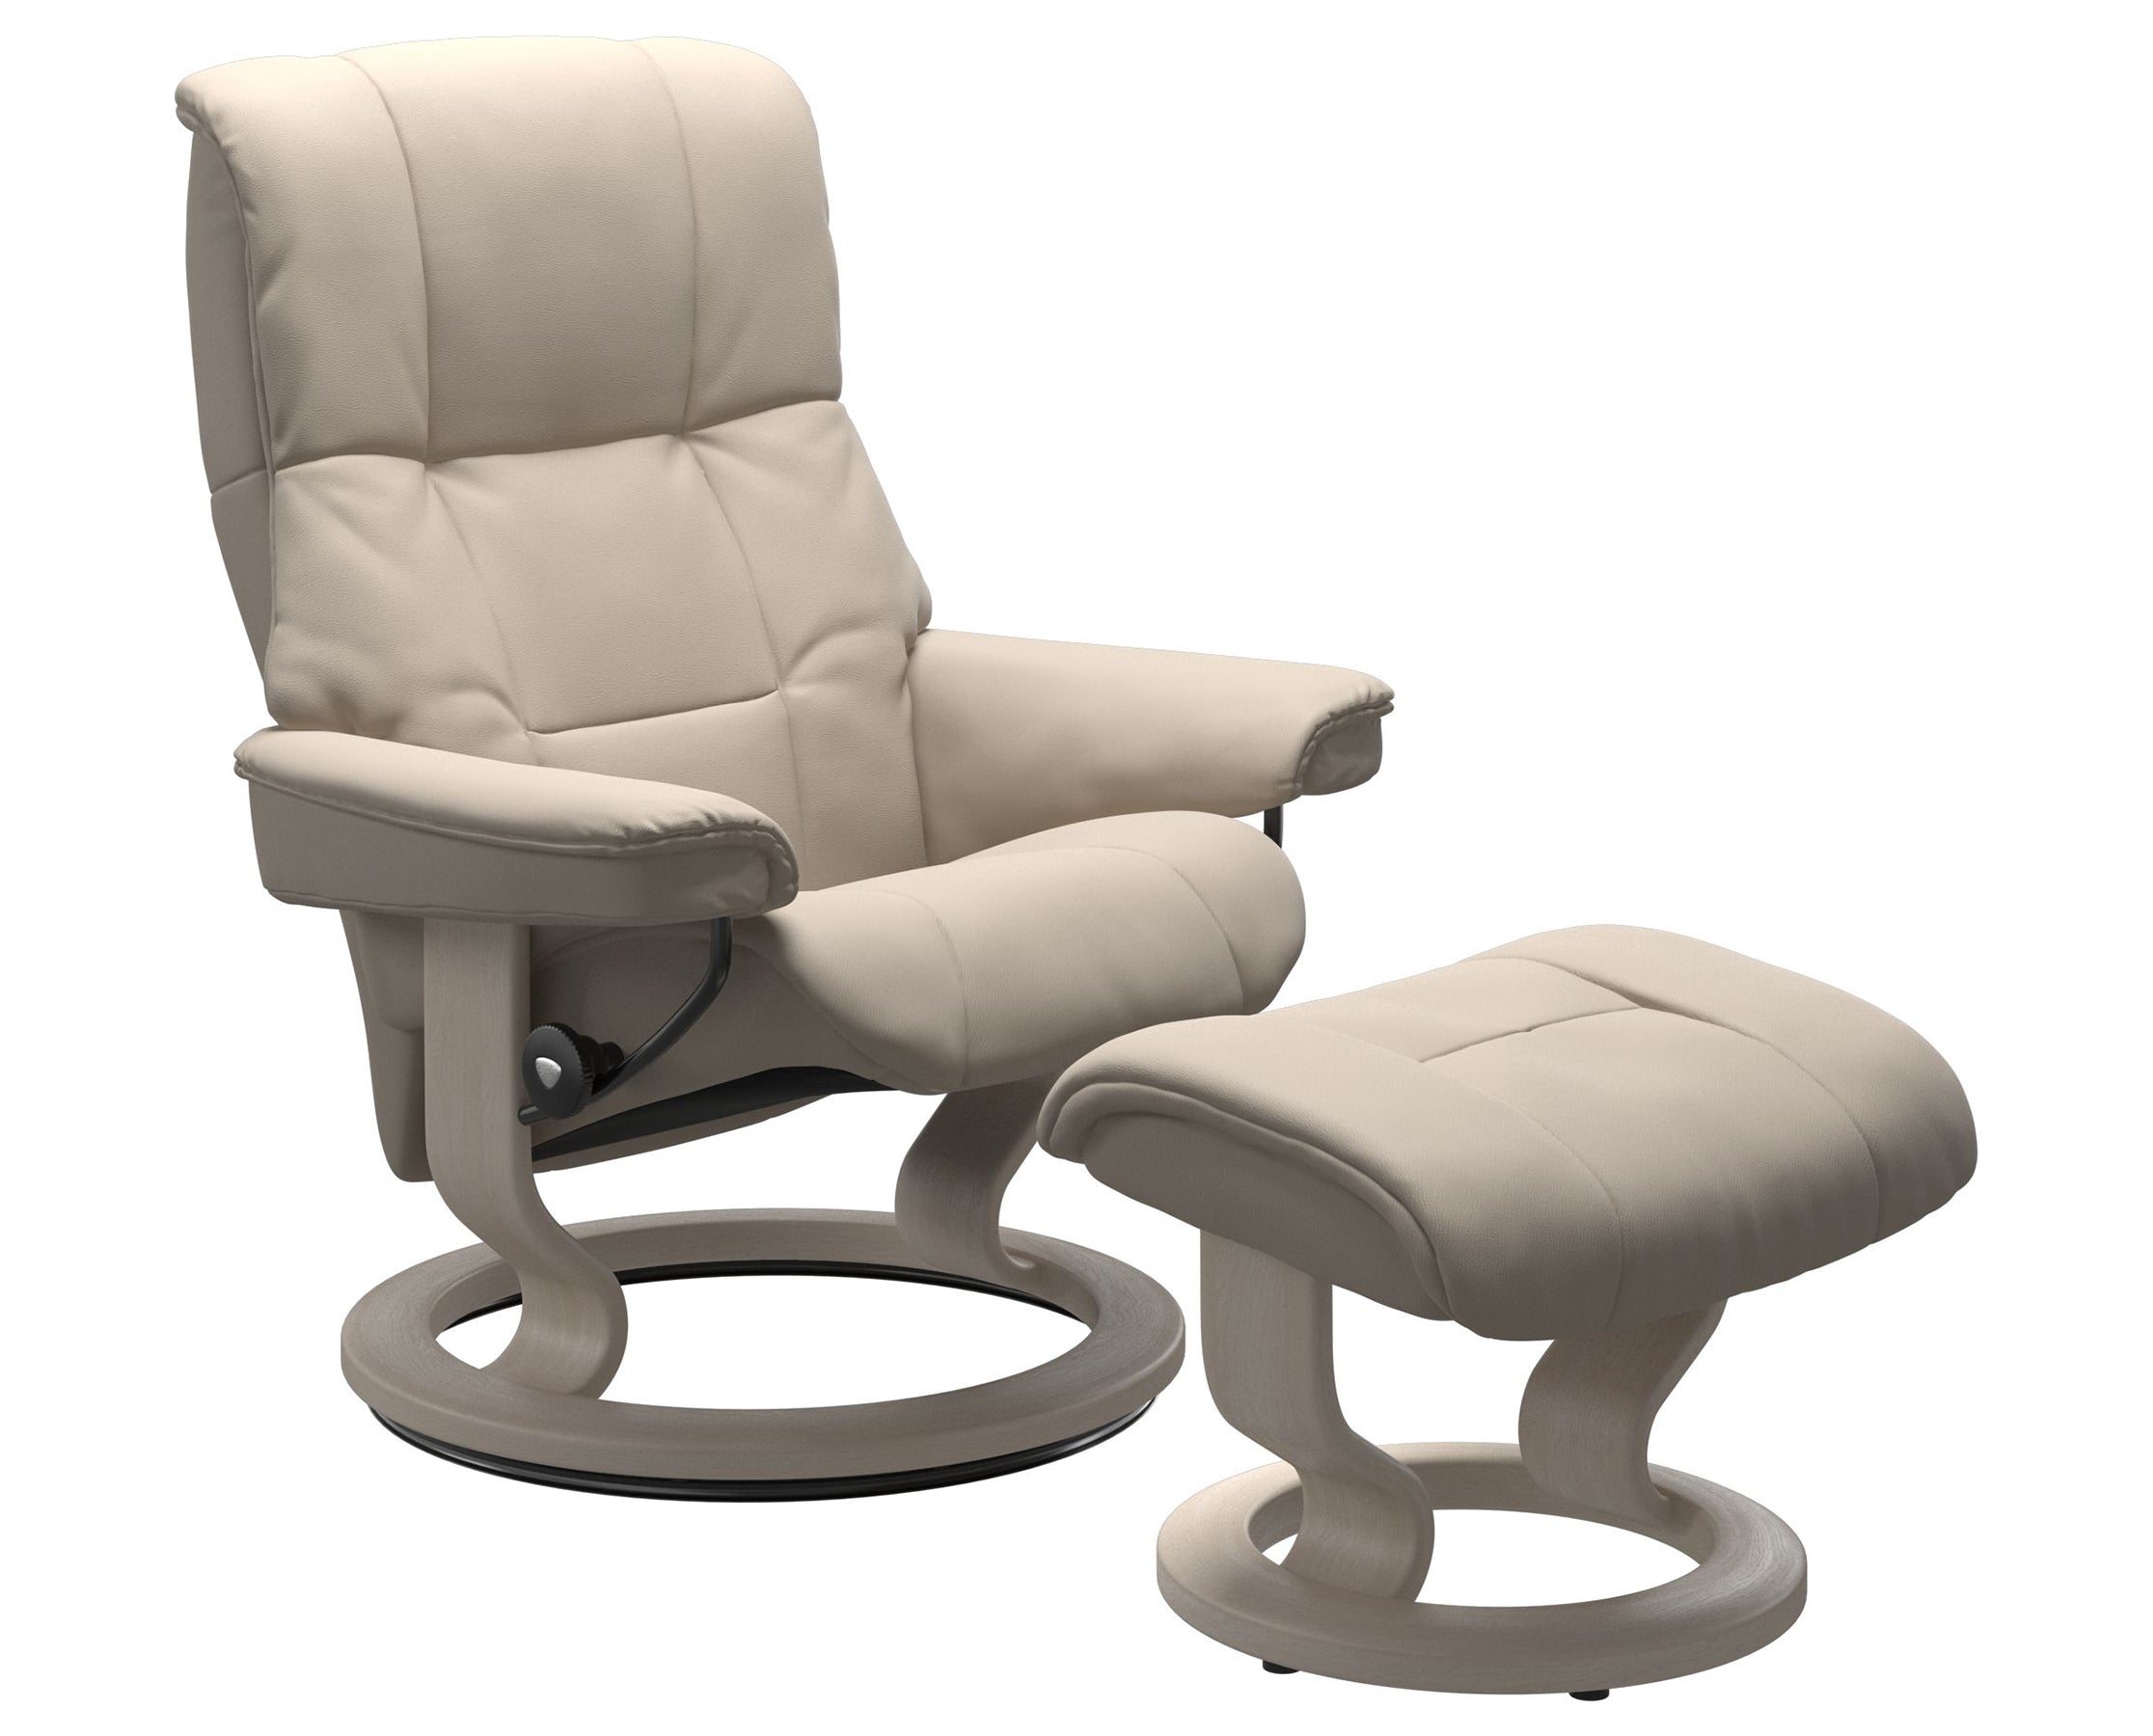 Paloma Leather Fog S/M/L and Whitewash Base | Stressless Mayfair Classic Recliner | Valley Ridge Furniture